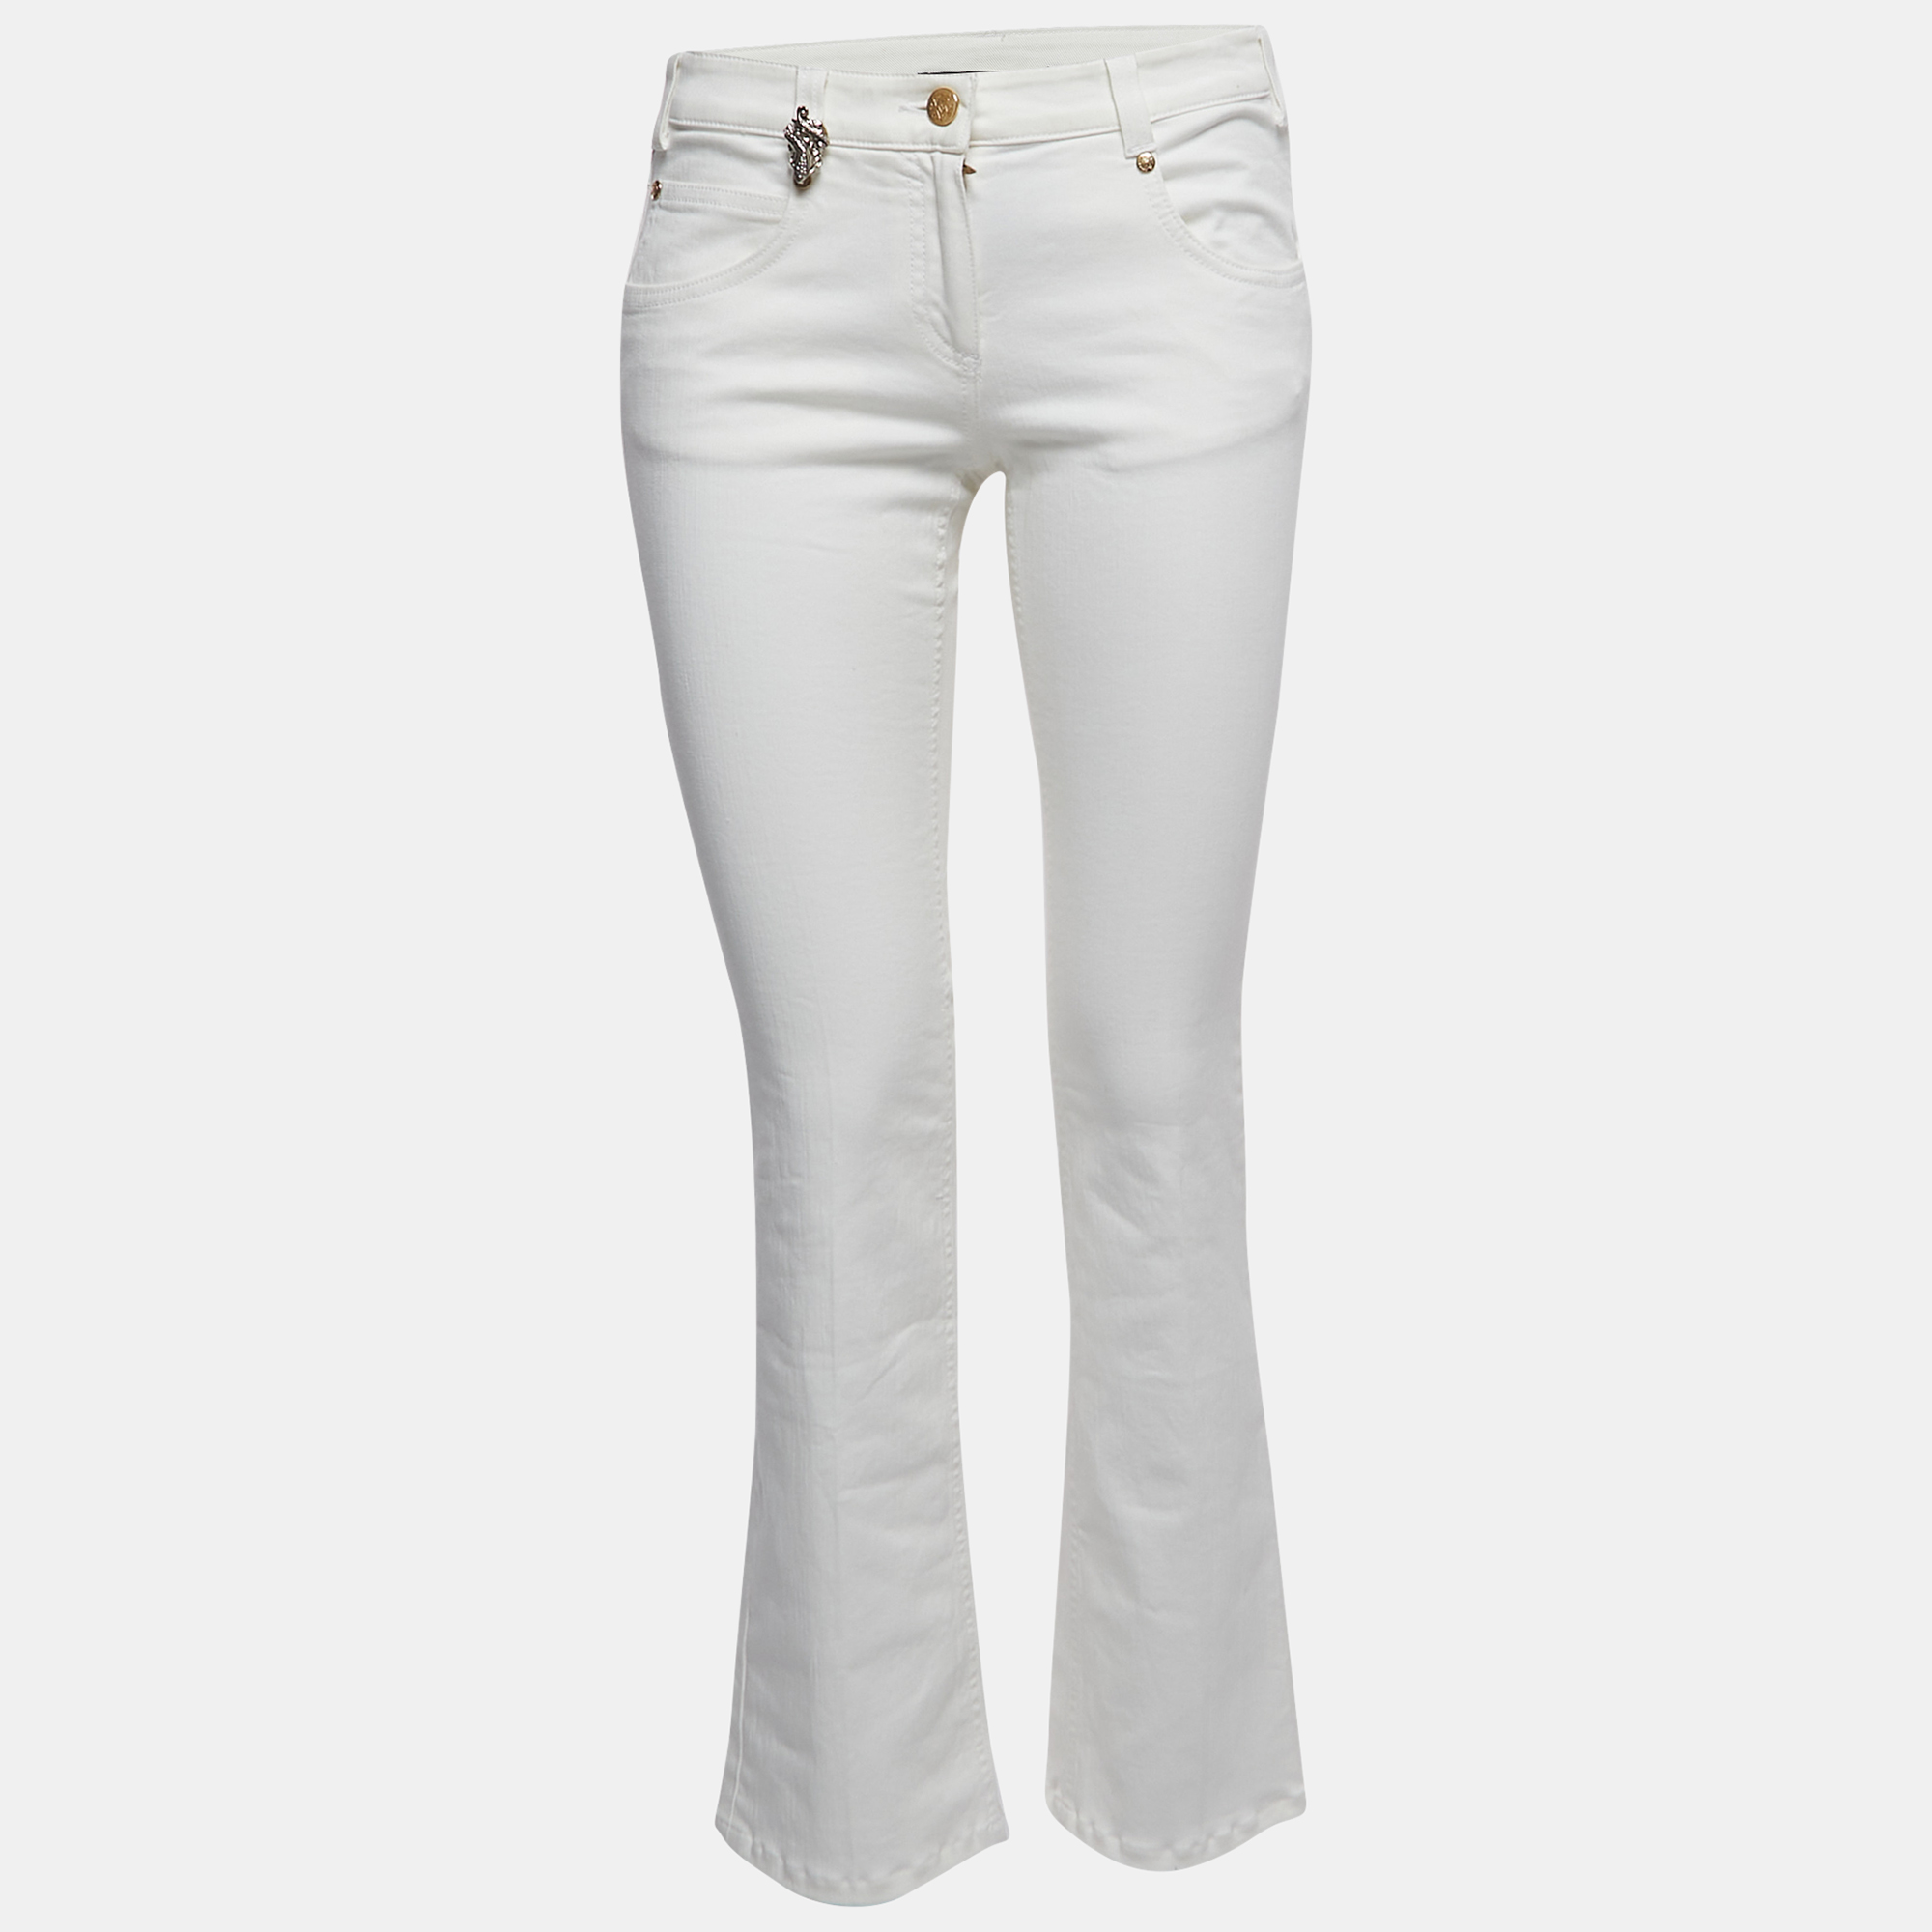 A good pair of jeans always makes the closet complete. This pair of jeans is tailored with such skill and style that it will be your favorite in no time. It will give you a comfortable stylish fit.